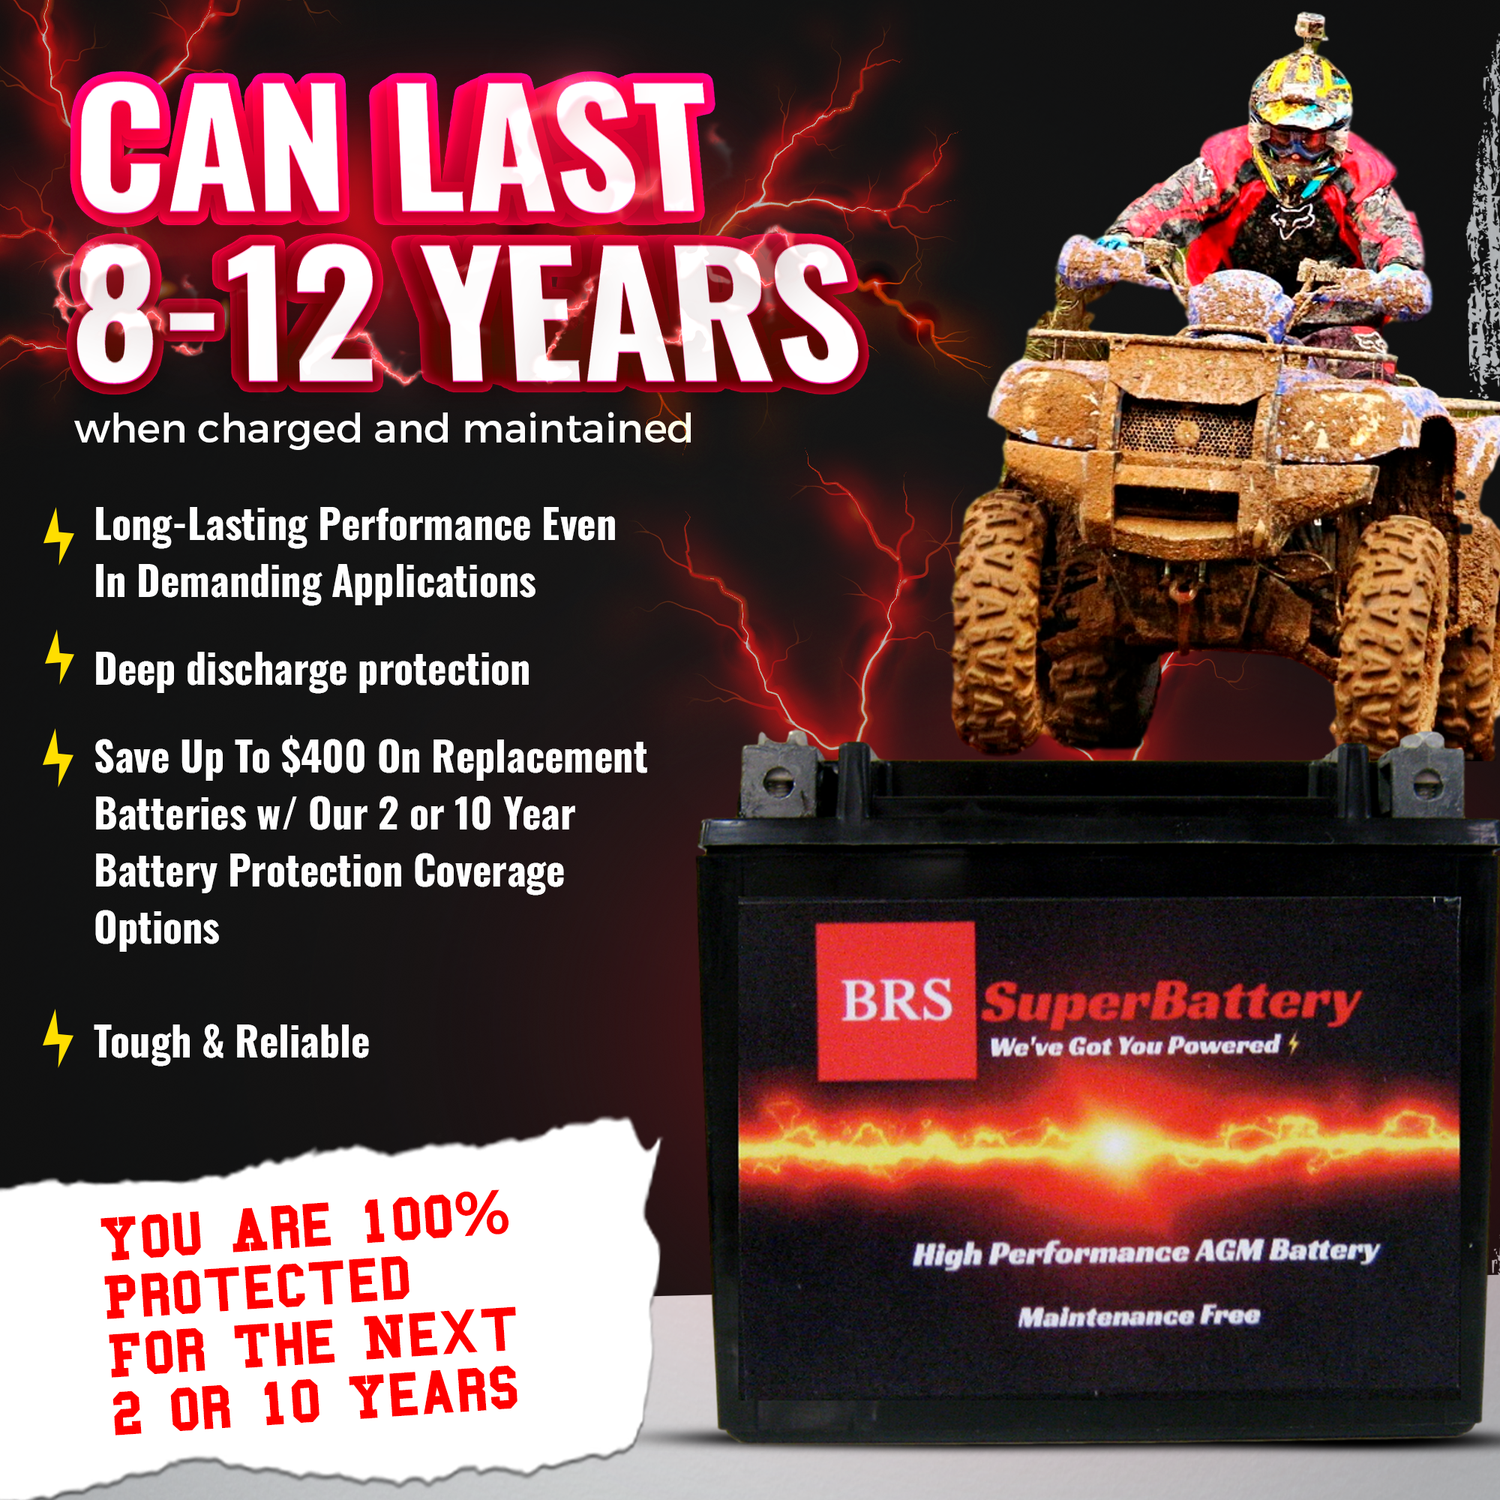 BRS9B-BS 12v High Performance Sealed AGM PowerSport 10 Year Battery - BRS Super Battery